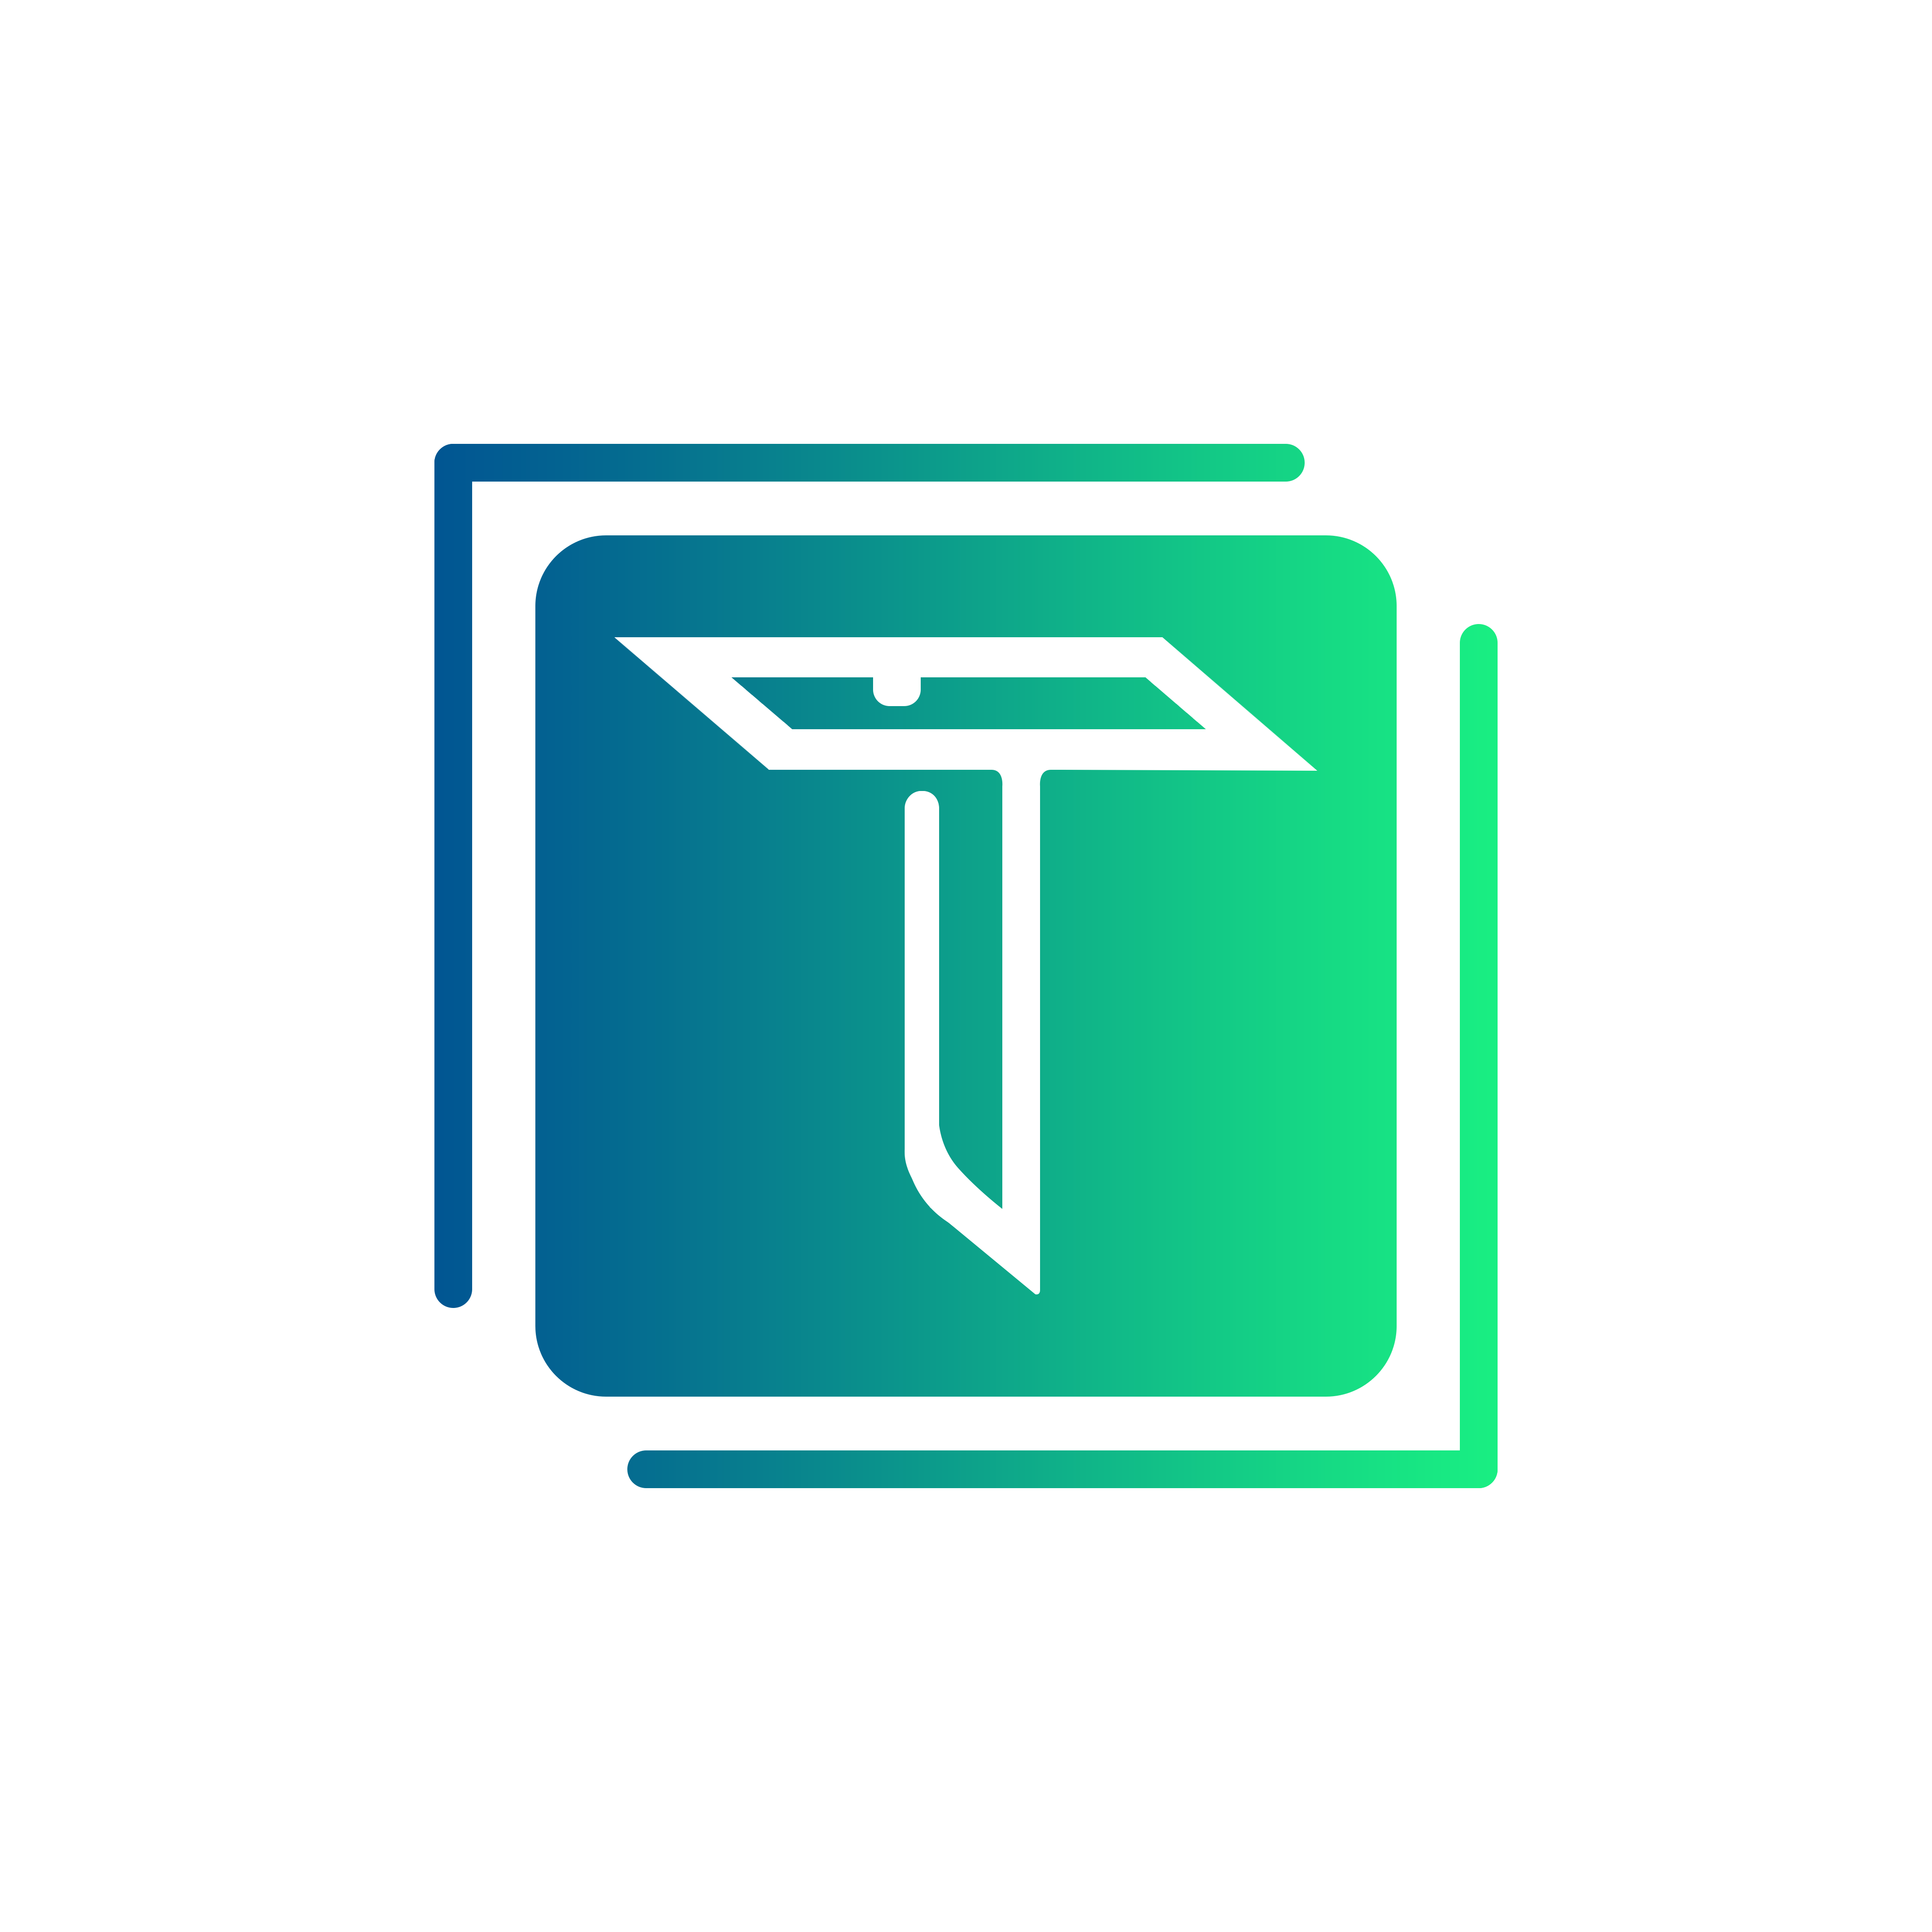 , Travenis: The First Play-to-Earn Metaverse Game Based on GTA San Andreas